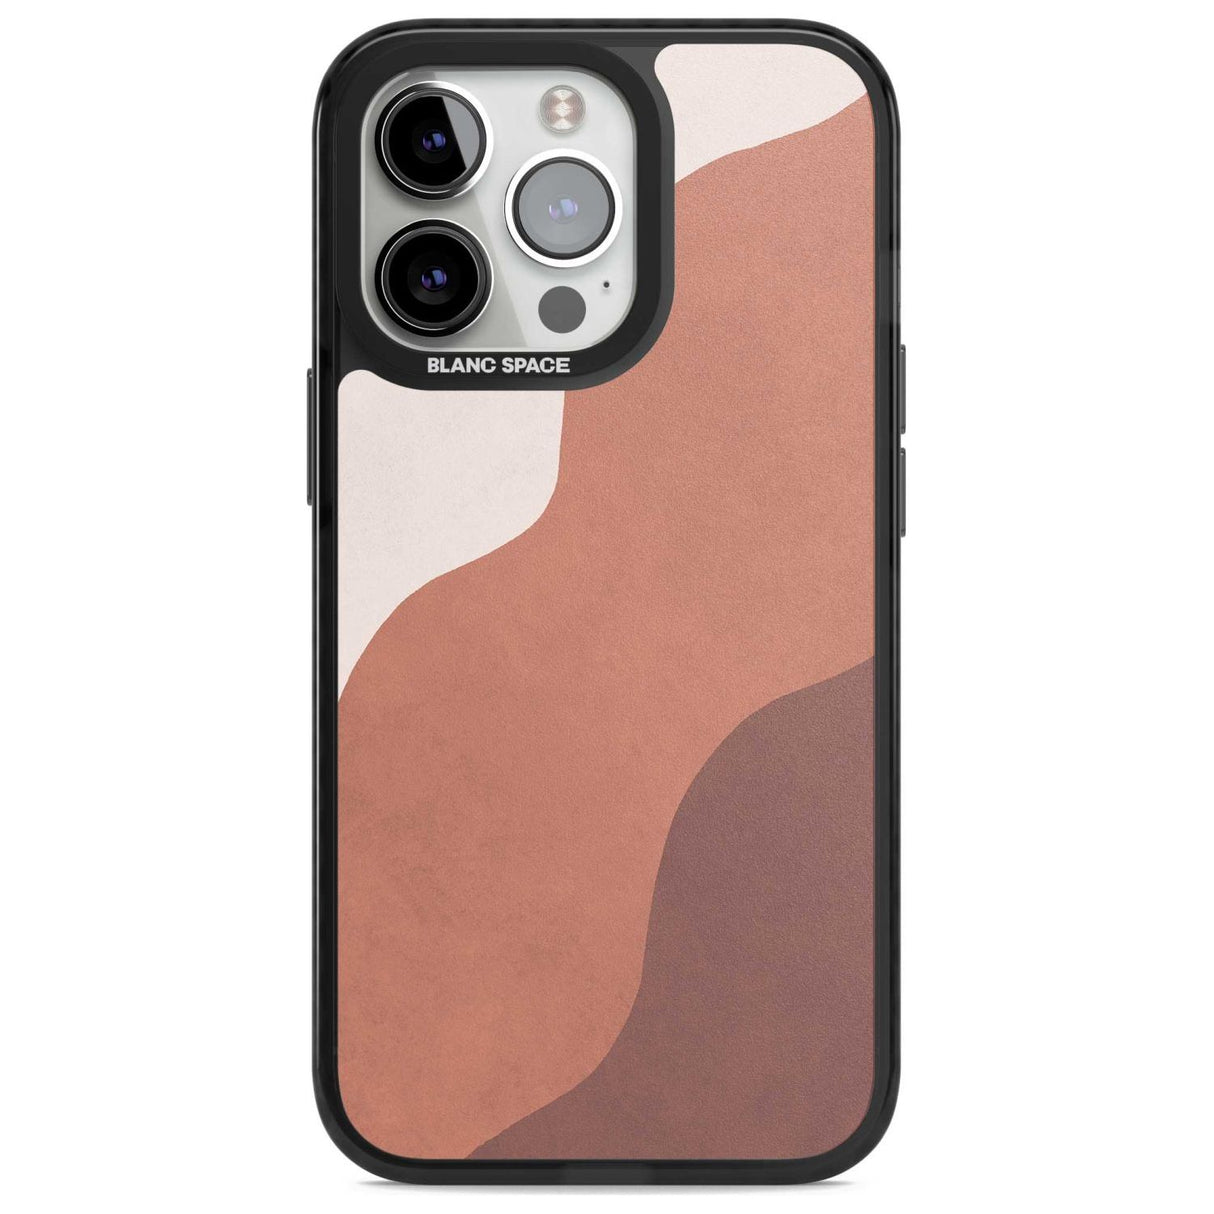 Lush Abstract Watercolour Design #3 Phone Case iPhone 15 Pro / Magsafe Black Impact Case,iPhone 15 Pro Max / Magsafe Black Impact Case,iPhone 14 Pro Max / Magsafe Black Impact Case,iPhone 13 Pro / Magsafe Black Impact Case,iPhone 14 Pro / Magsafe Black Impact Case Blanc Space